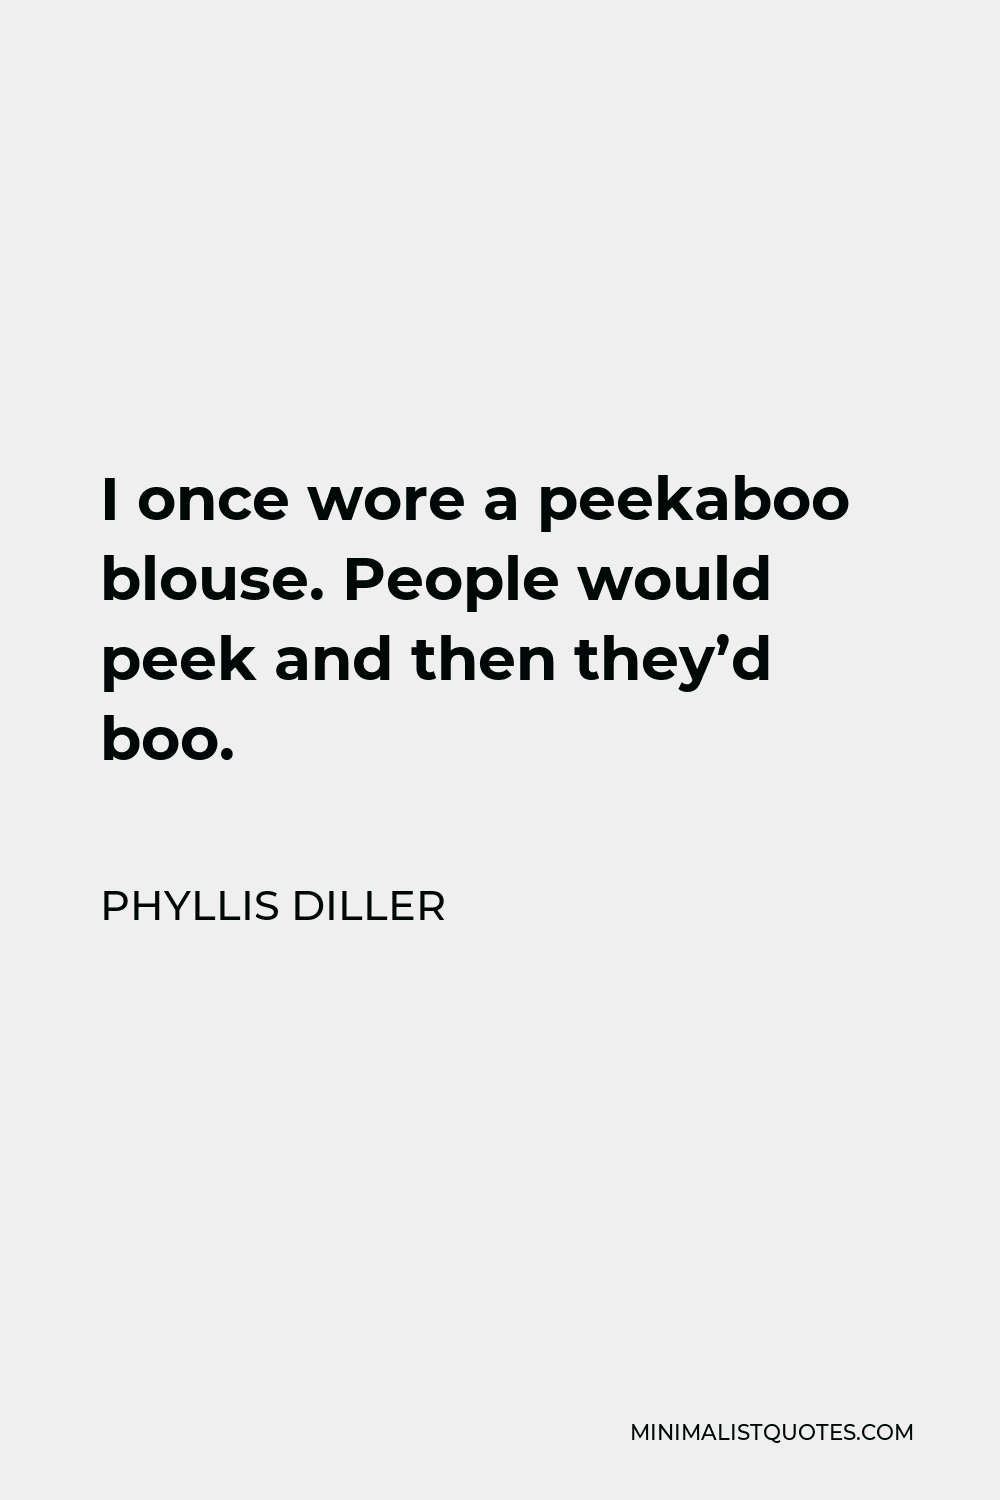 Phyllis Diller Quote - I once wore a peekaboo blouse. People would peek and then they’d boo.